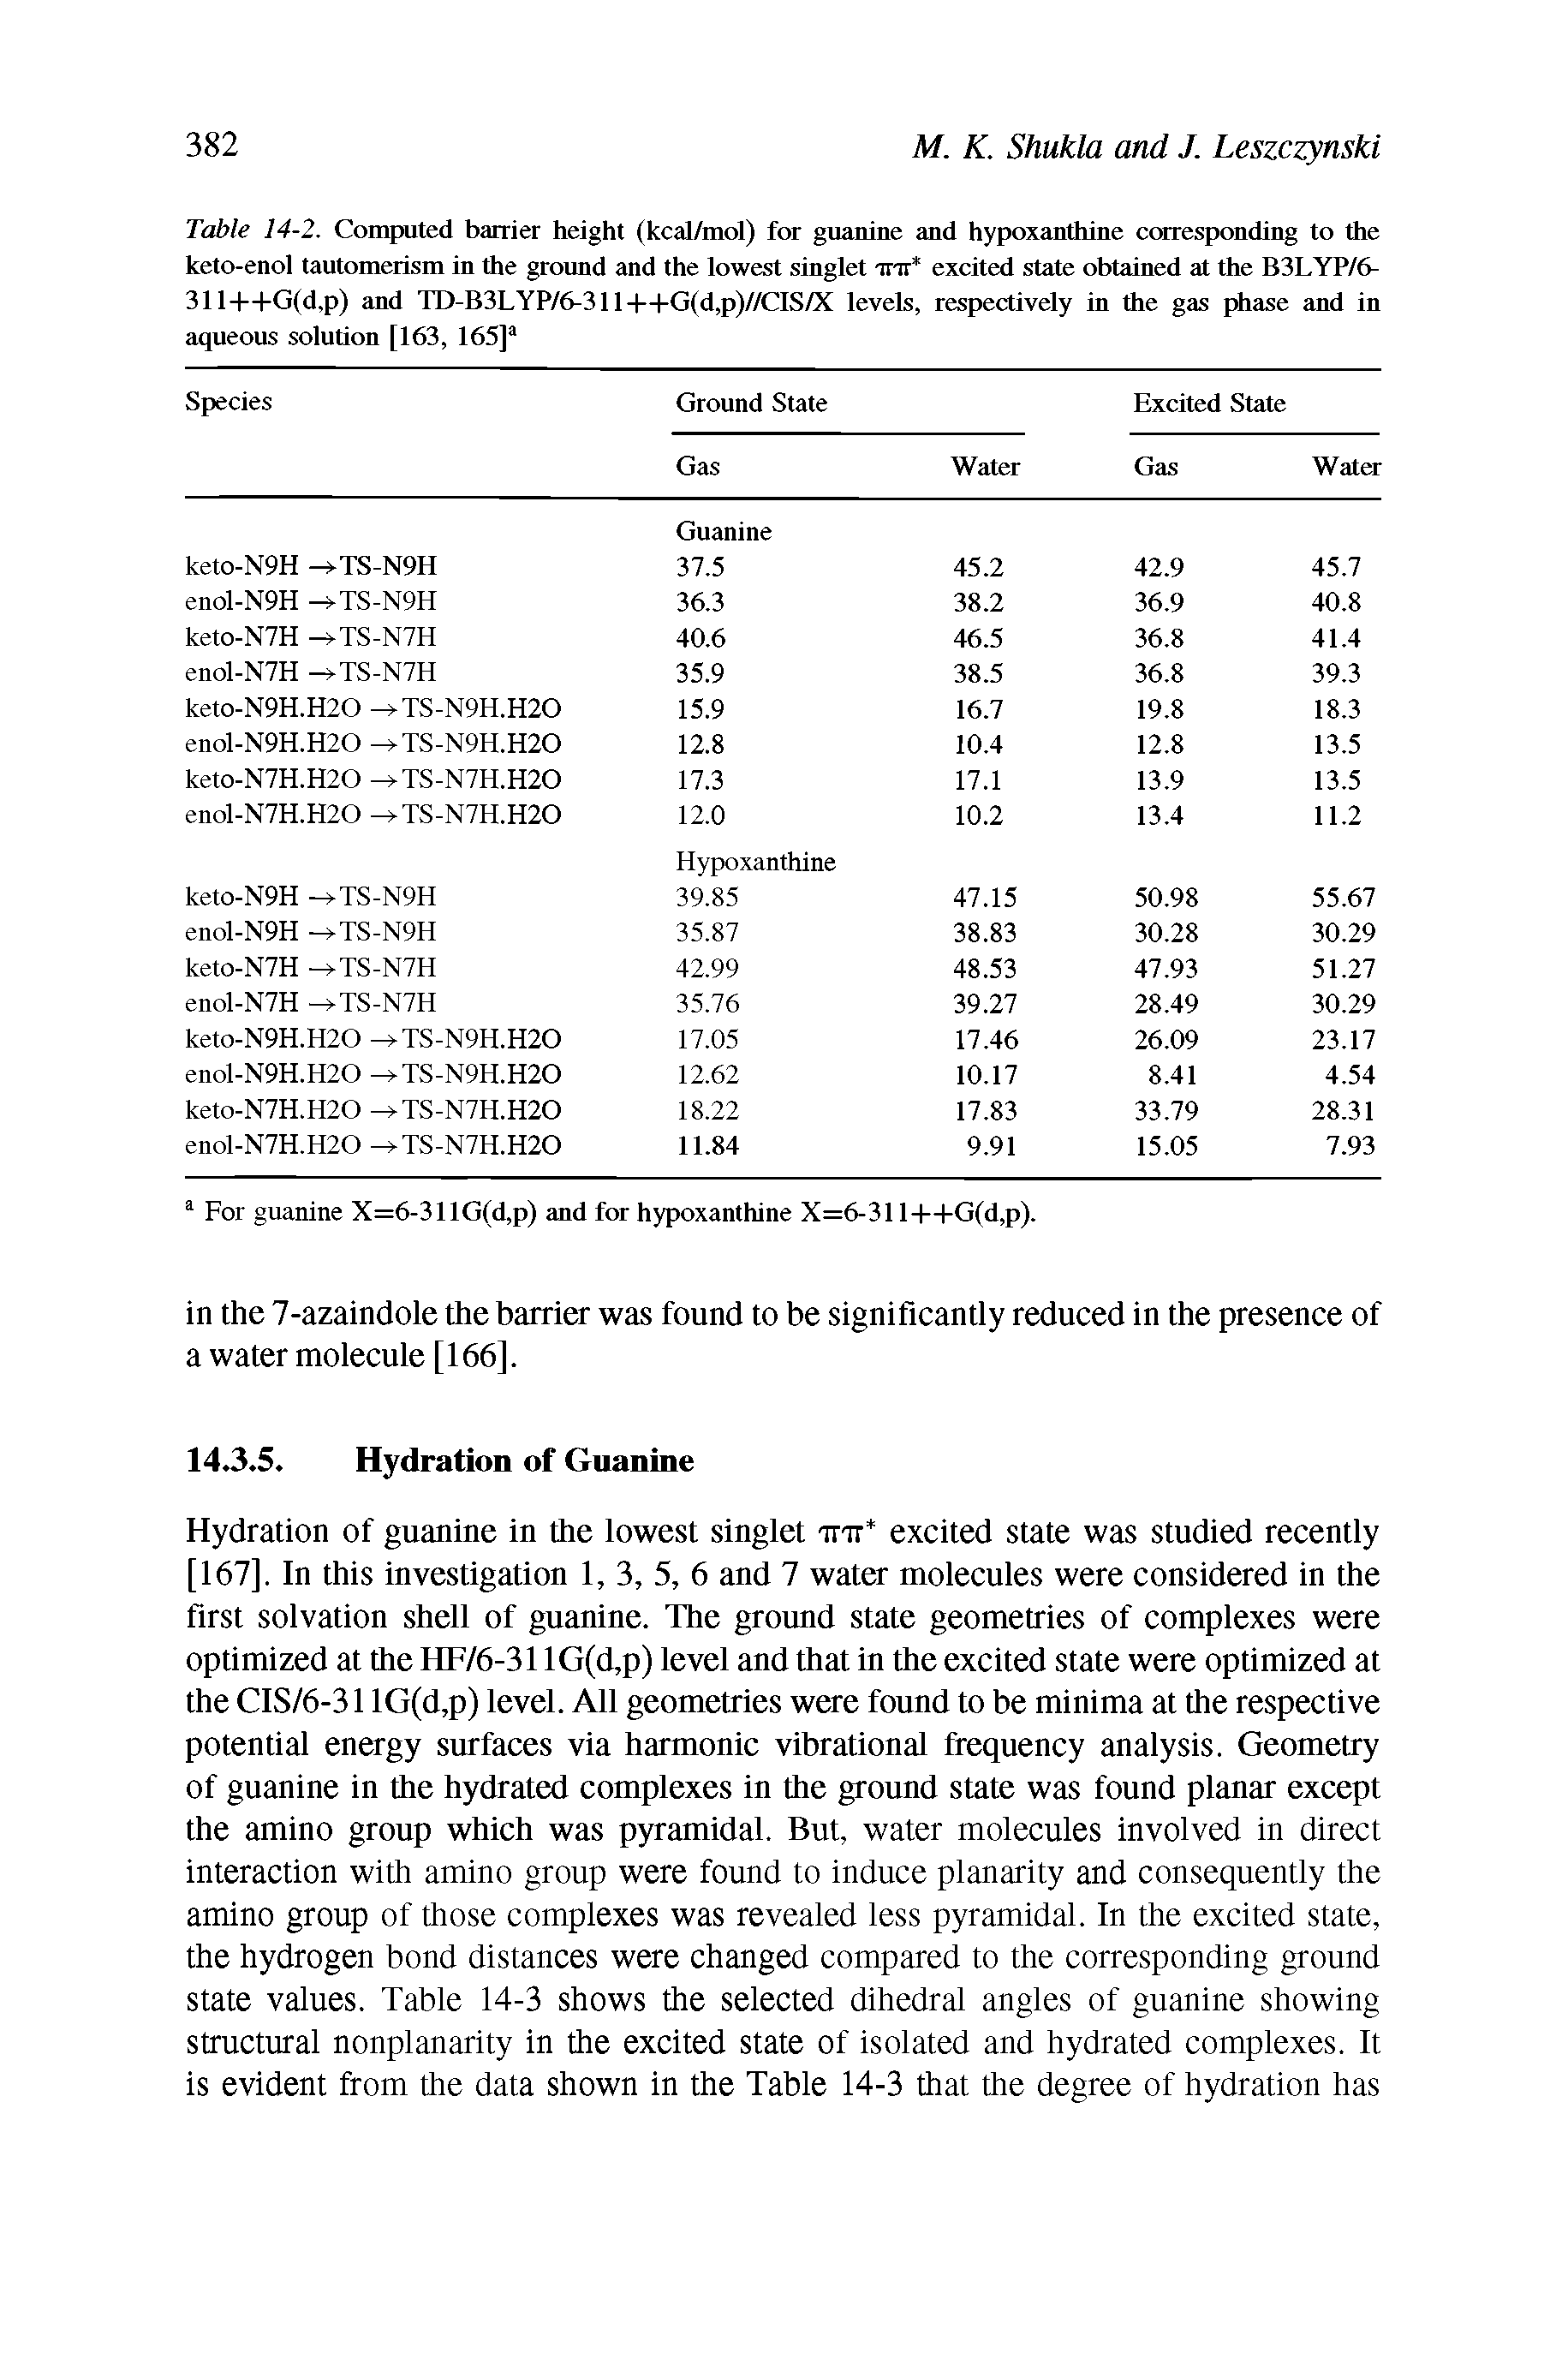 Table 14-2. Computed barrier height (kcal/mol) for guanine and hypoxanthine corresponding to the keto-enol tautomerism in the ground and the lowest singlet tt-jt excited state obtained at the B3LYP/6-311++G(d,p) and TD-B3LYP/6-311++G(d,p)//CIS/X levels, respectively in the gas phase and in aqueous solution [163, 165]a...